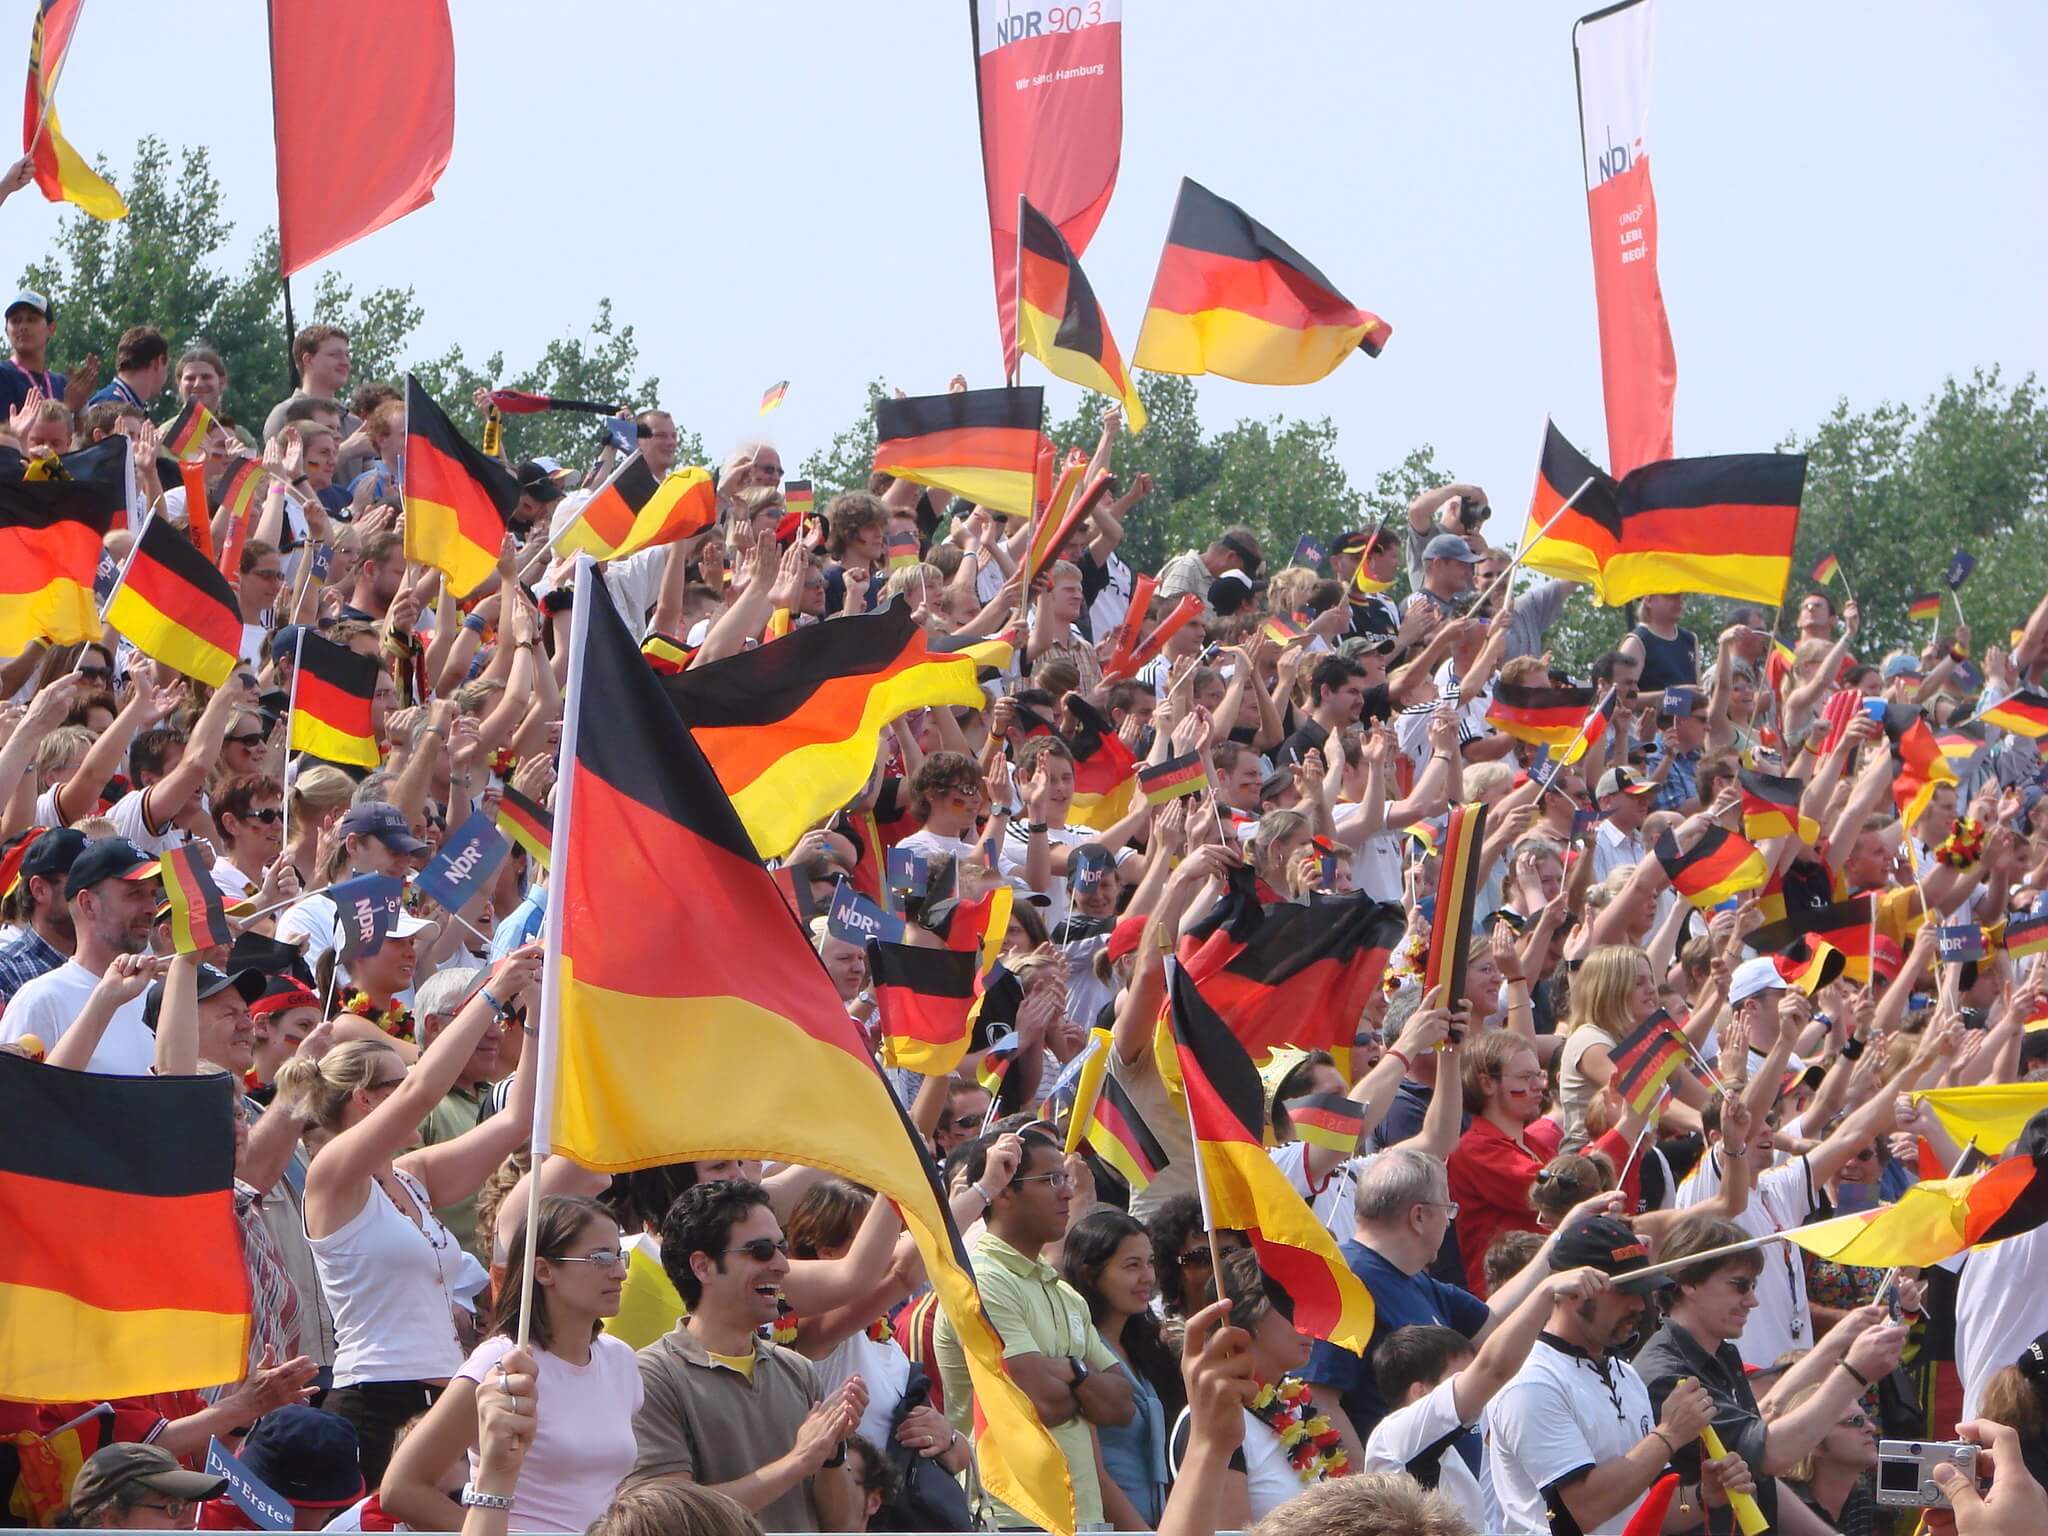 Guerot - In 2006 Germany hosted the FIFA soccer World Cup. Photocapy - Flickr